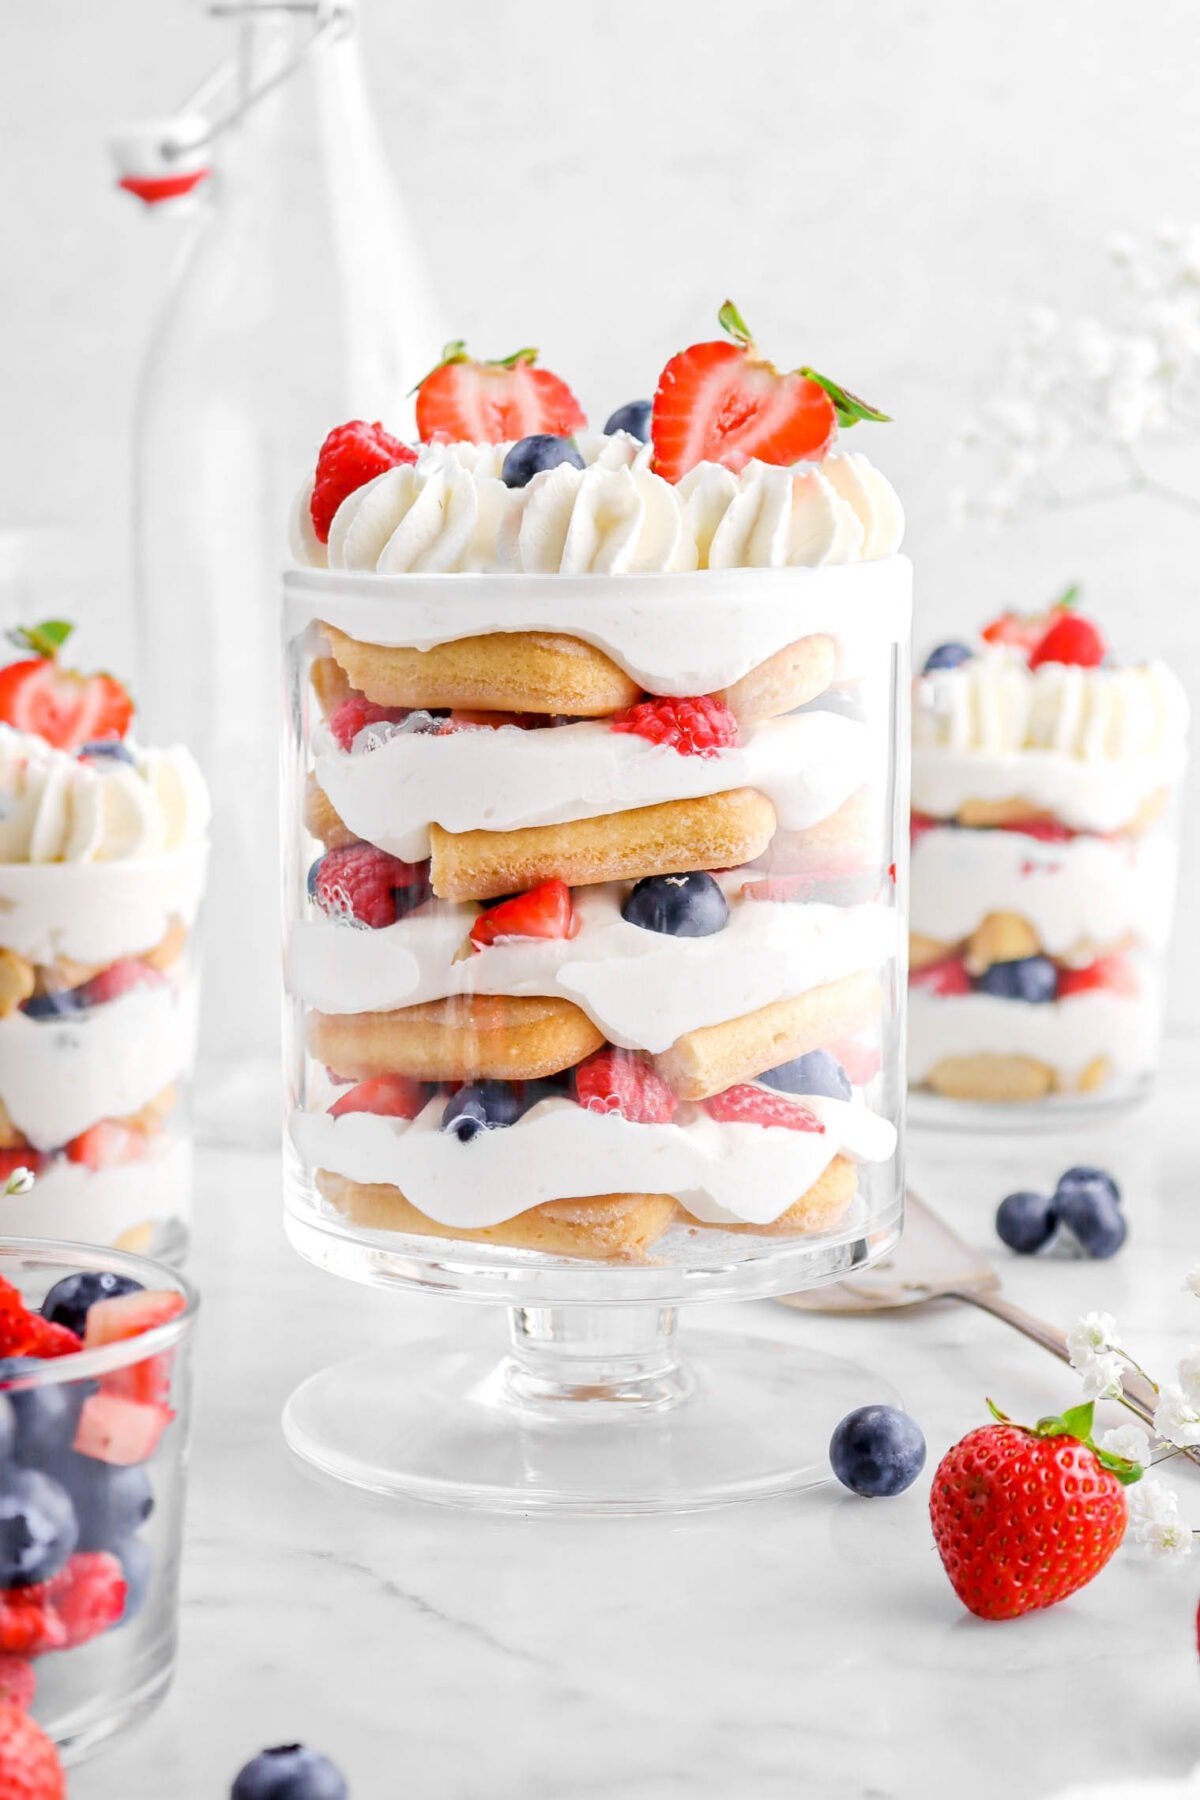 close up of berry trifle with piped whipped cream and berries on top, more berries around, and two trifles behind.